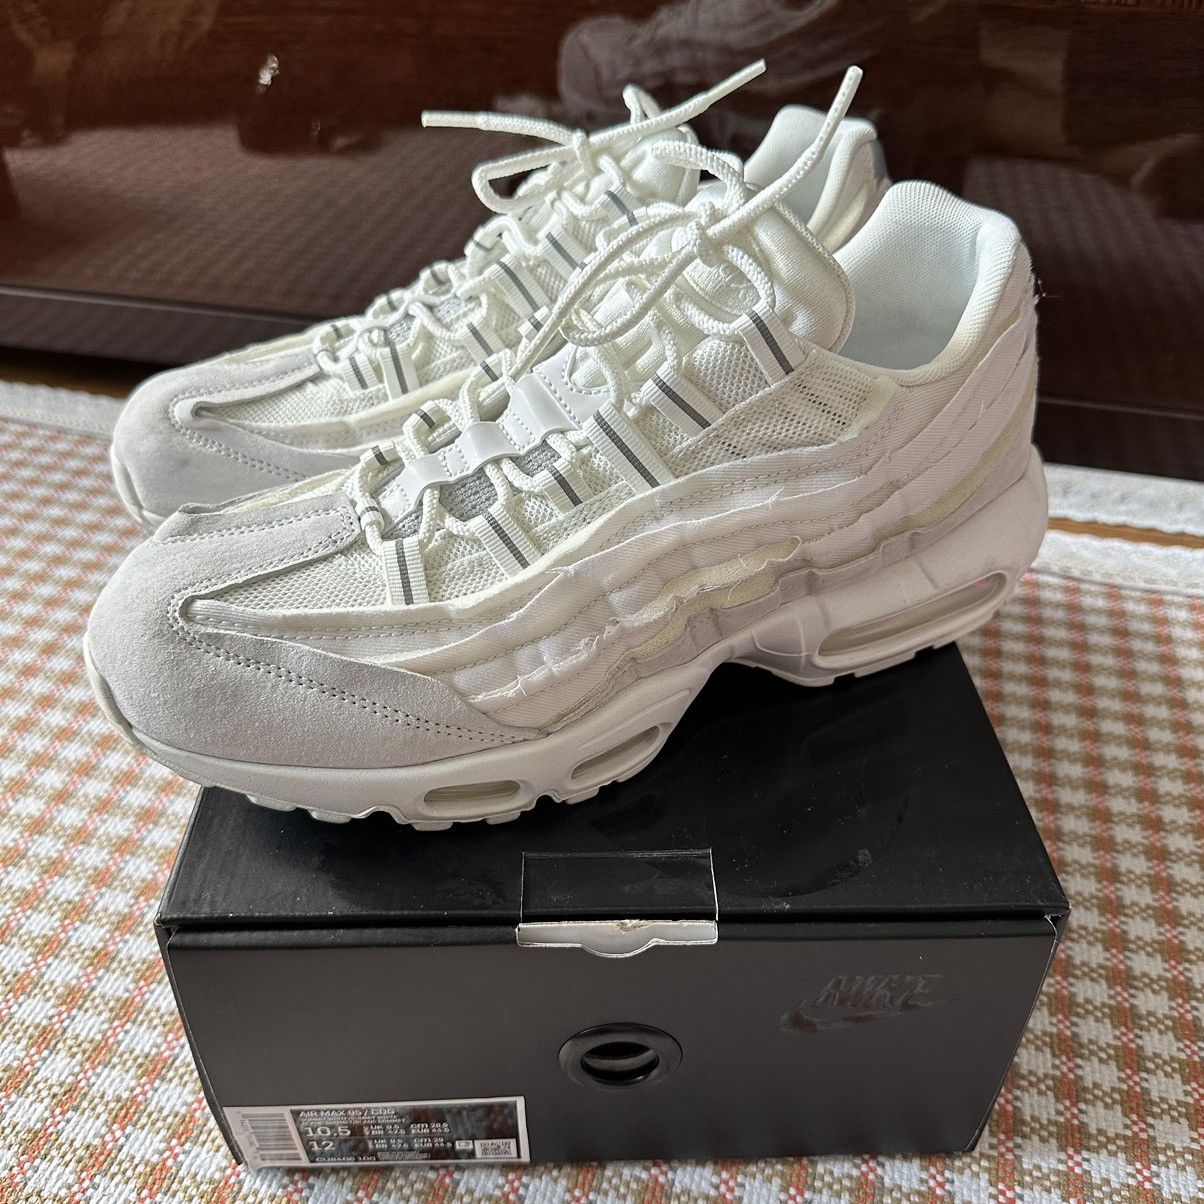 Nike Comme des Garcons (CDG) White Nike Air Max 95 | Grailed